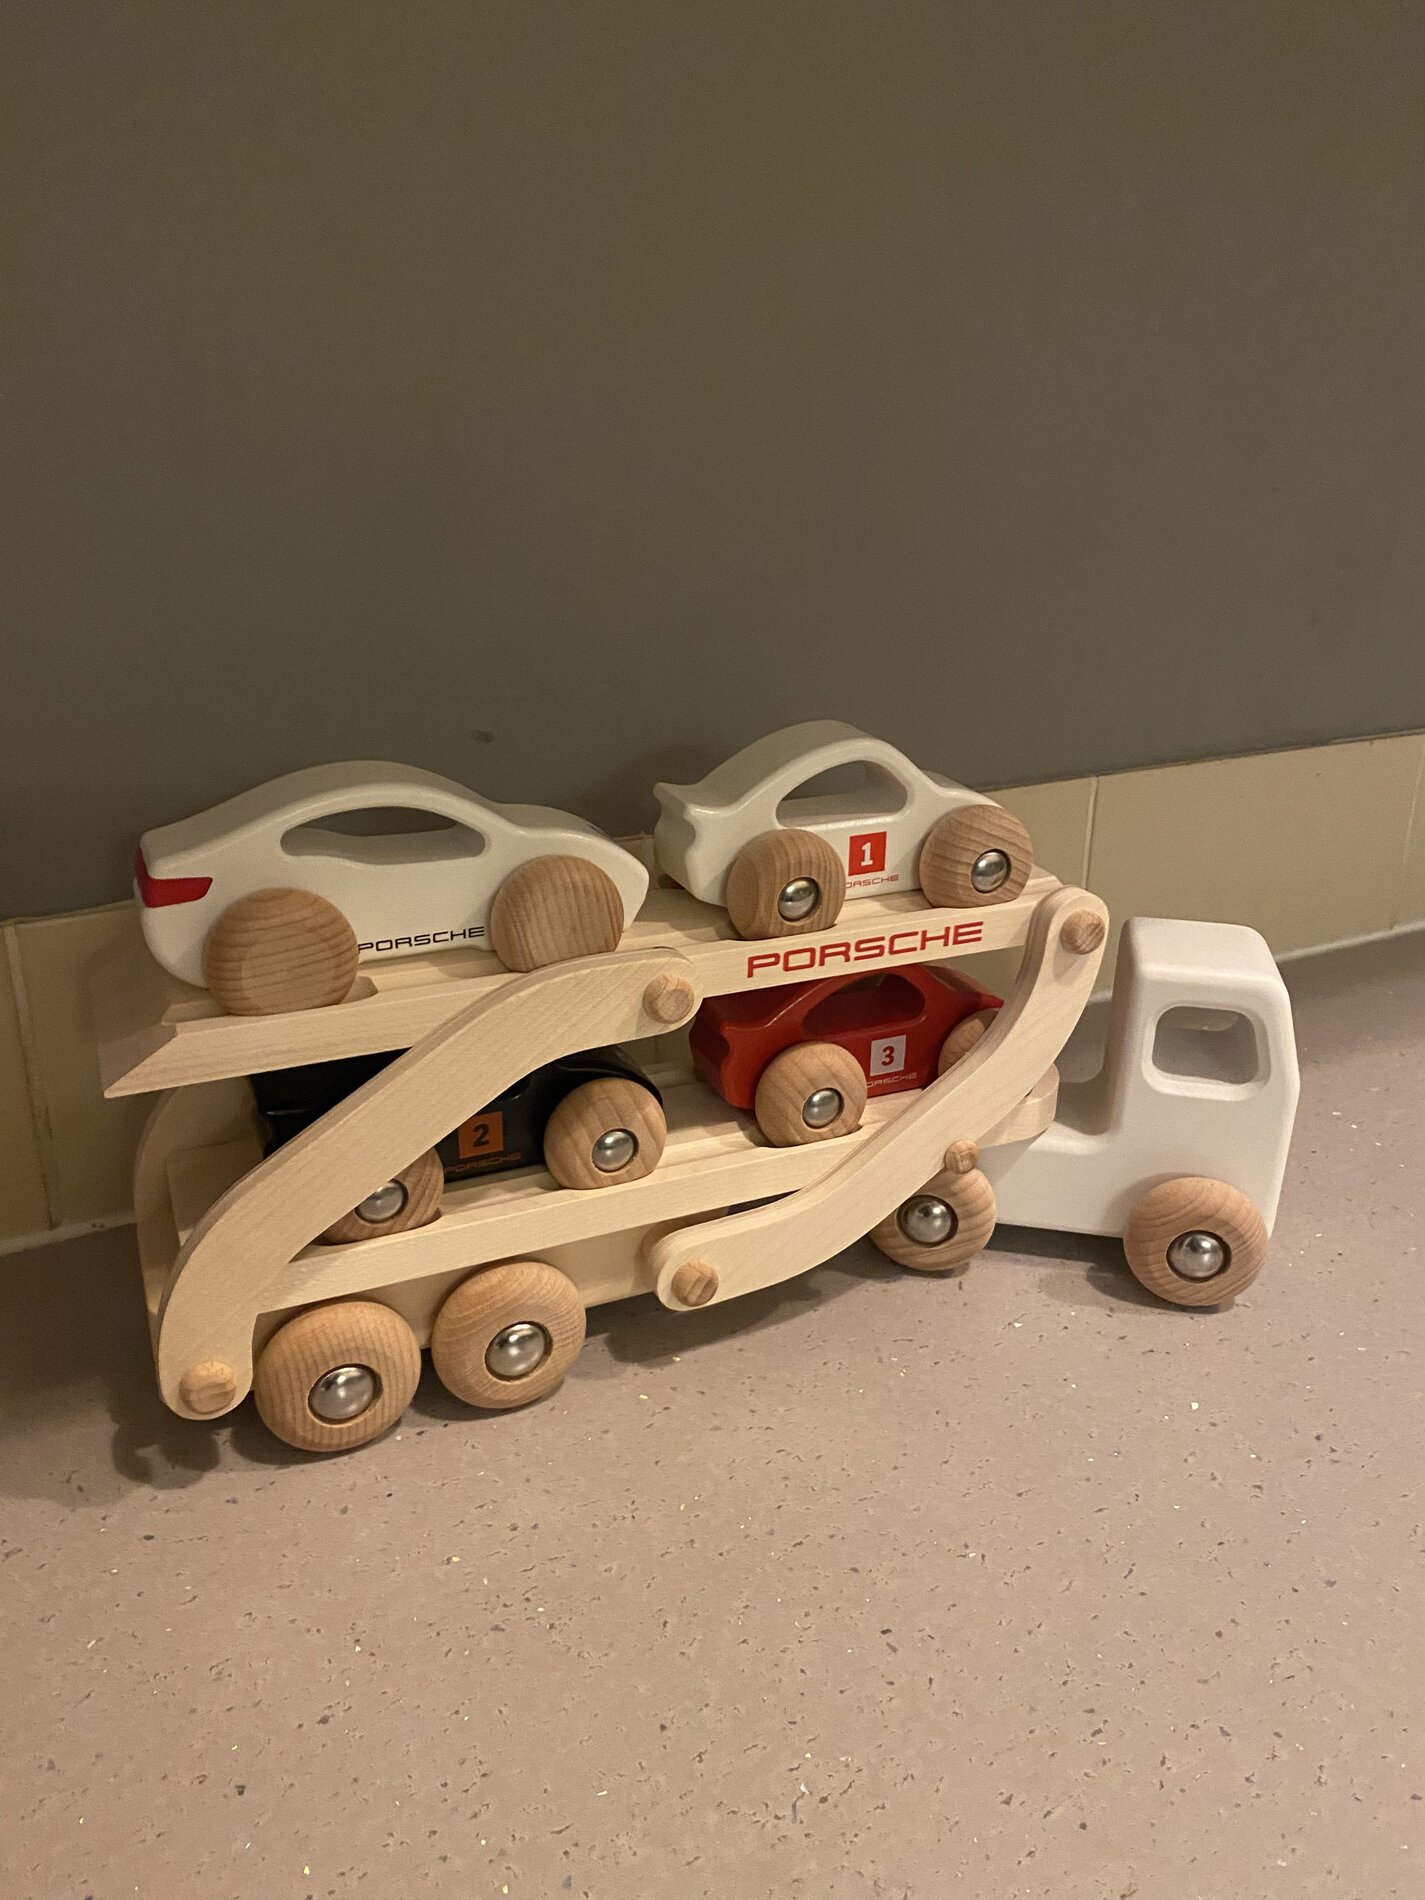 Porsche Taycan Wooden Taycan , Perfect gift for us ??? A074383E-3F2C-43A6-B2A6-842381010320